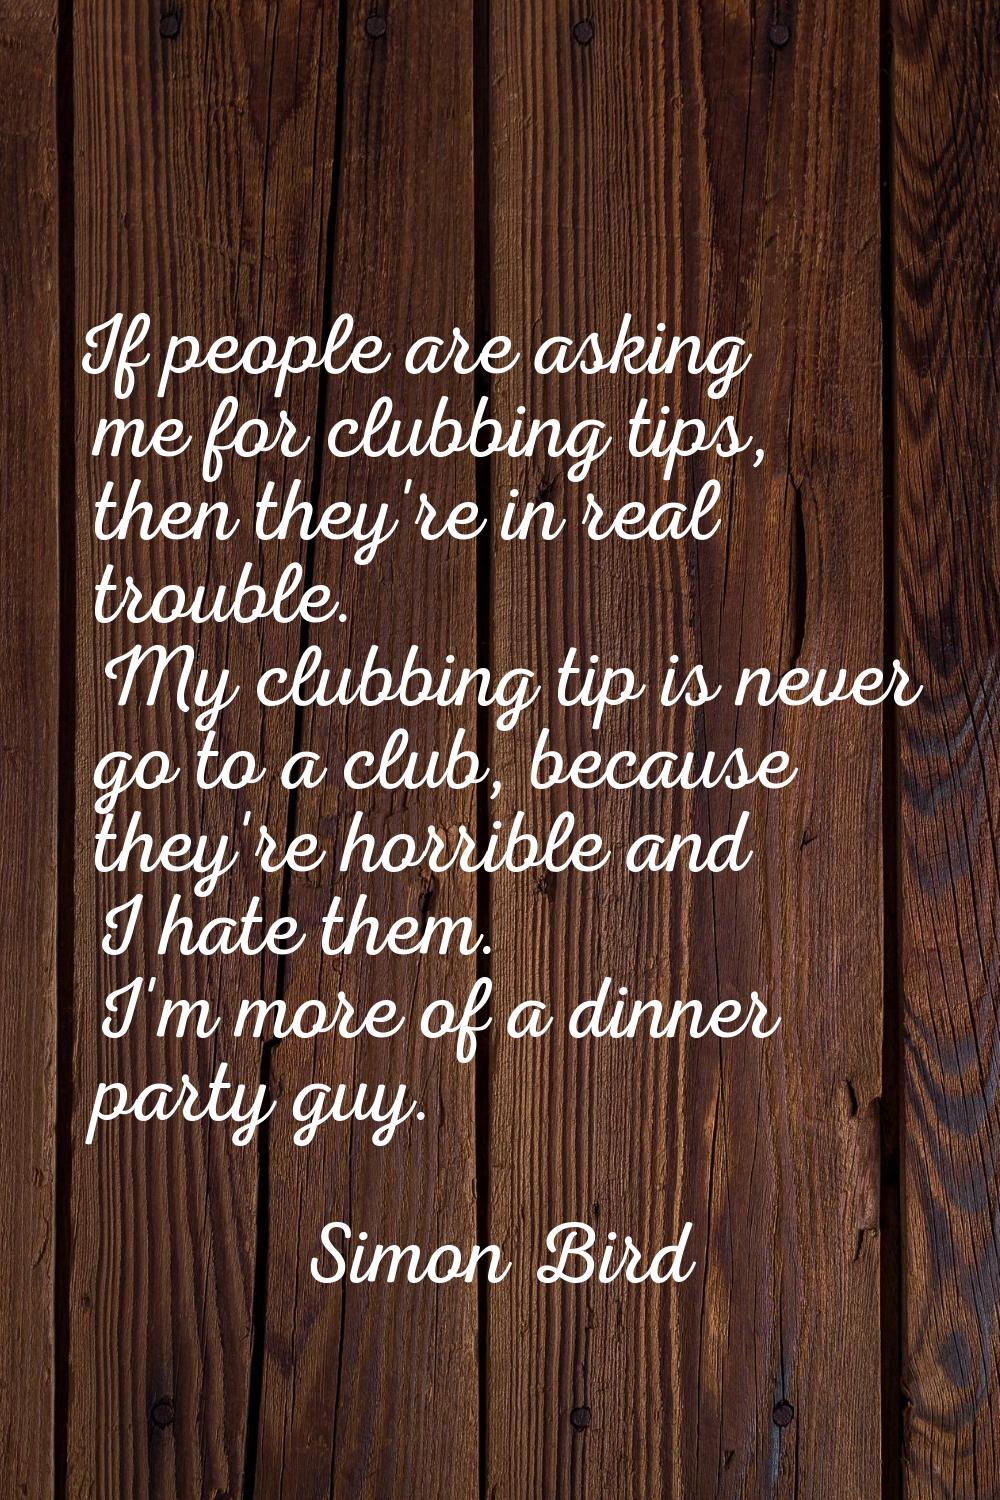 If people are asking me for clubbing tips, then they're in real trouble. My clubbing tip is never g